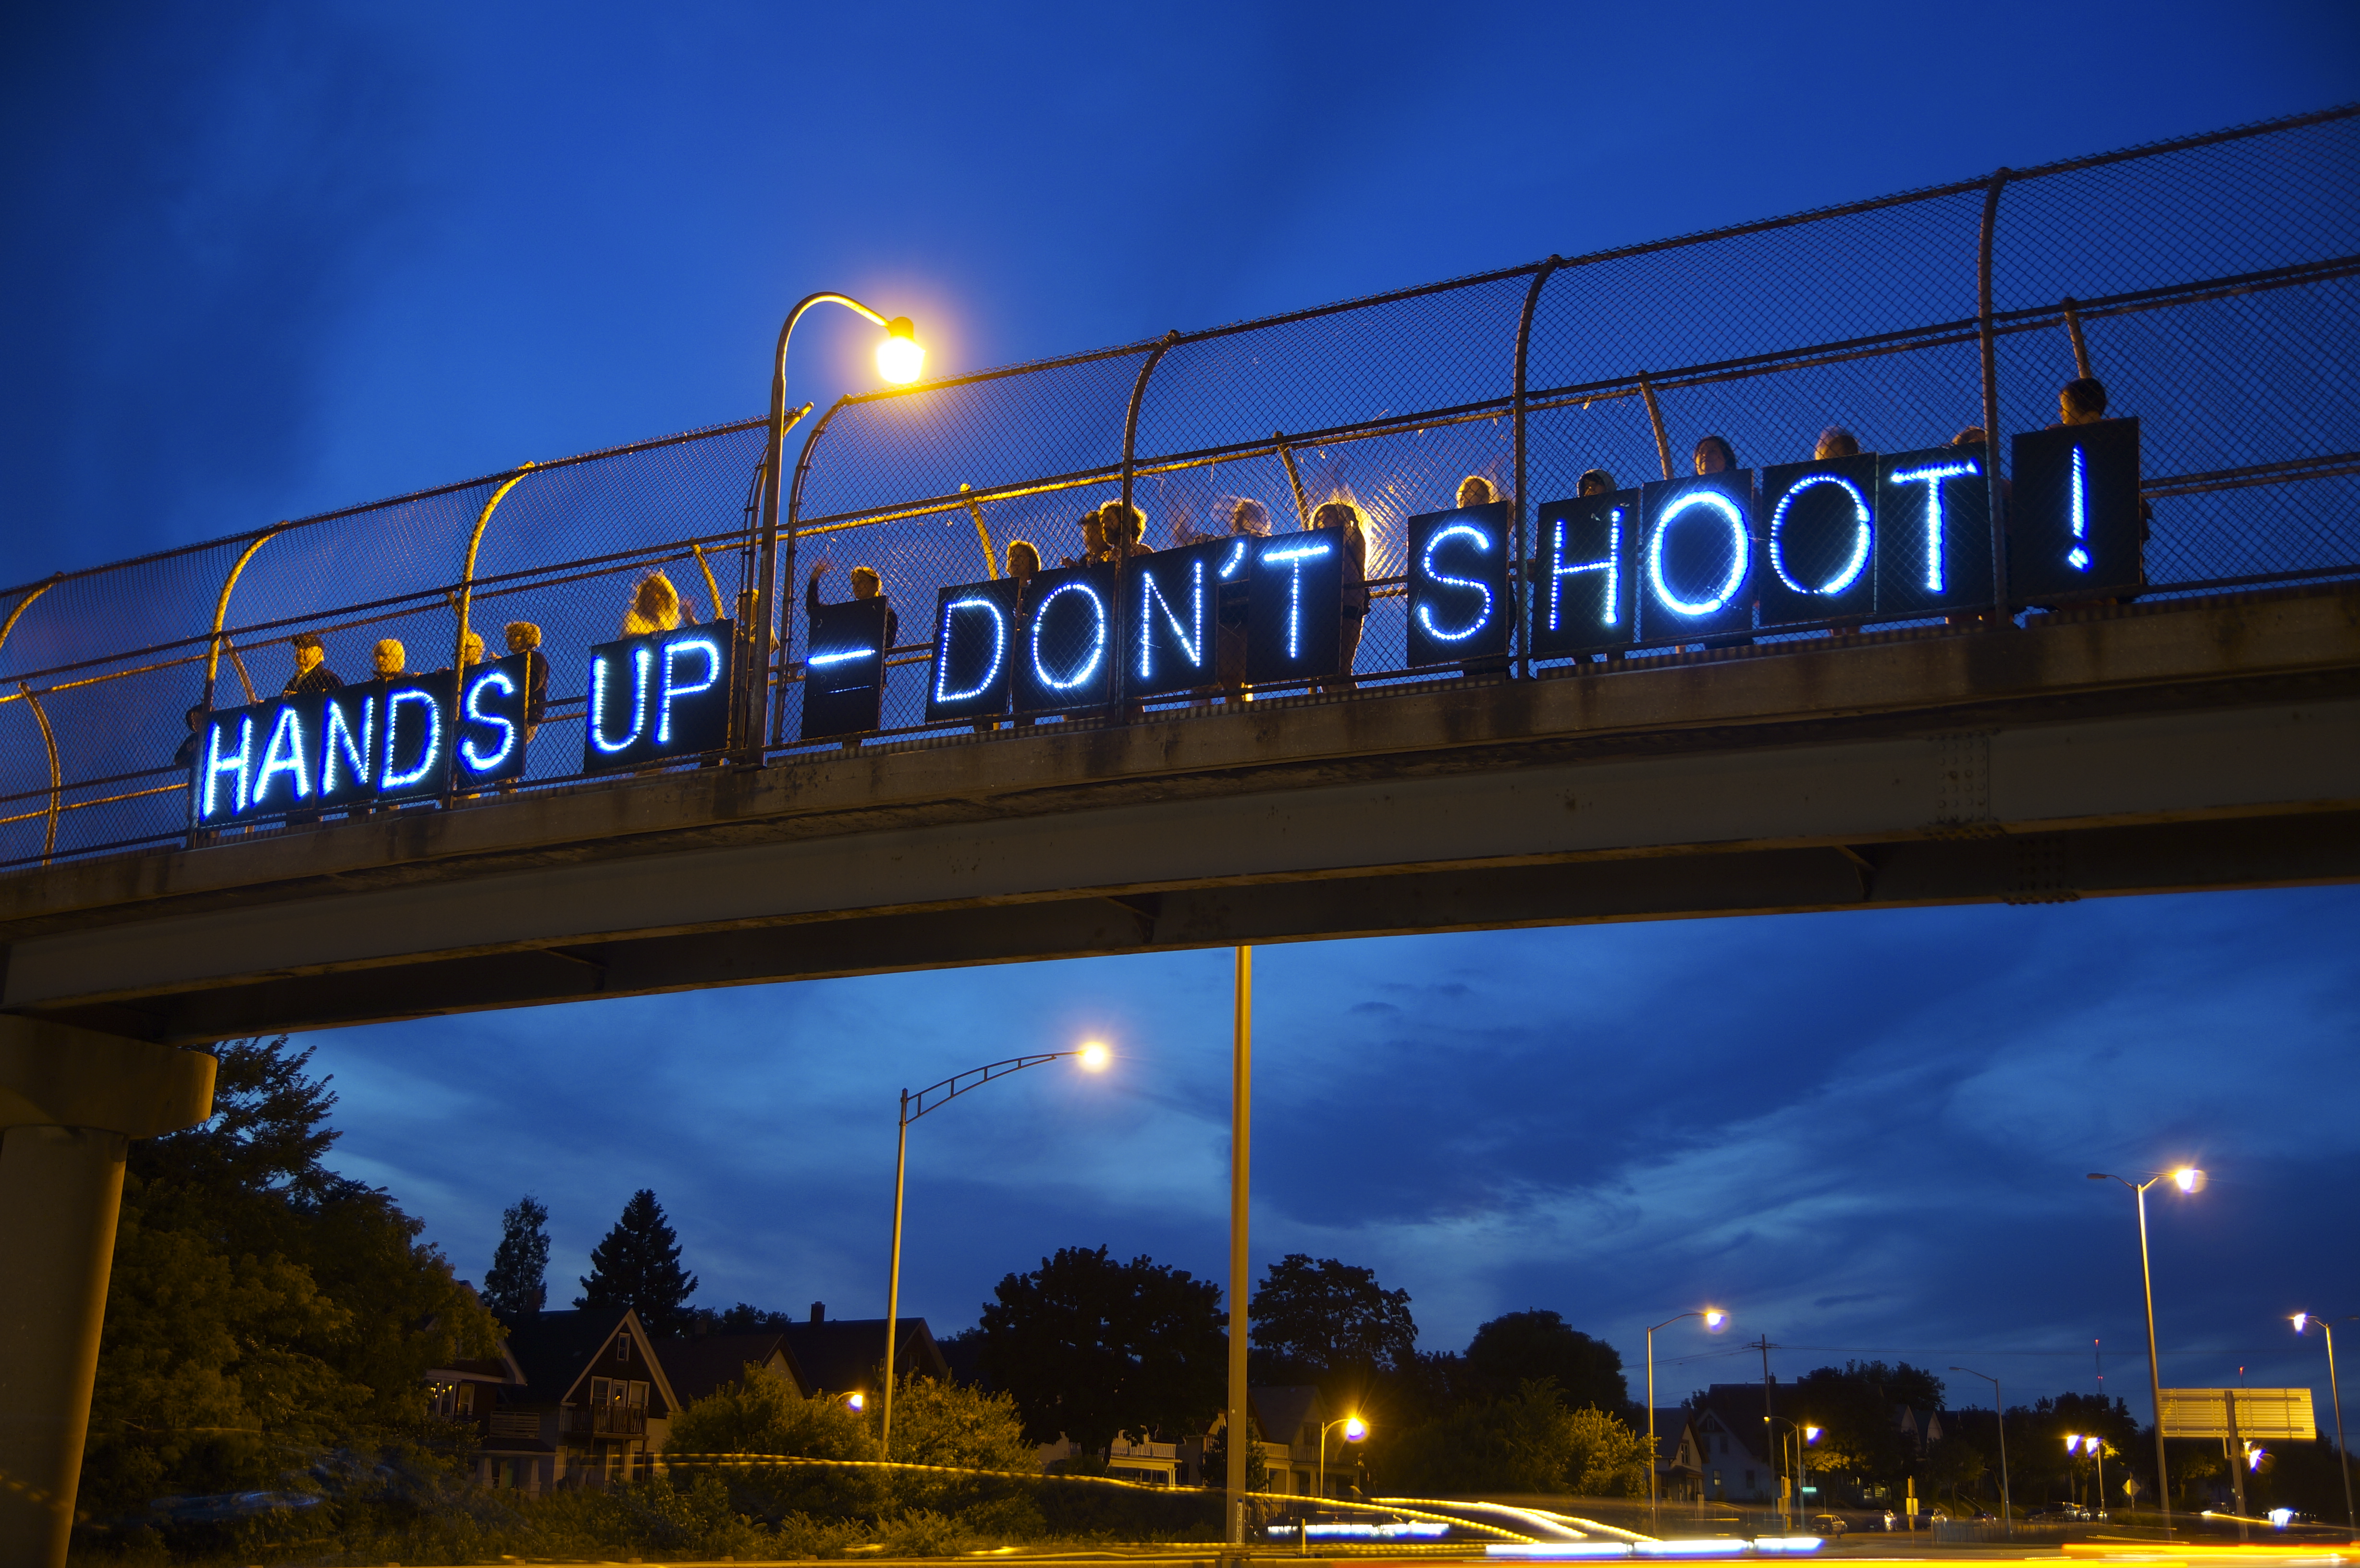 Photograph of "Hands up, Don't Shoot" sign on bridge